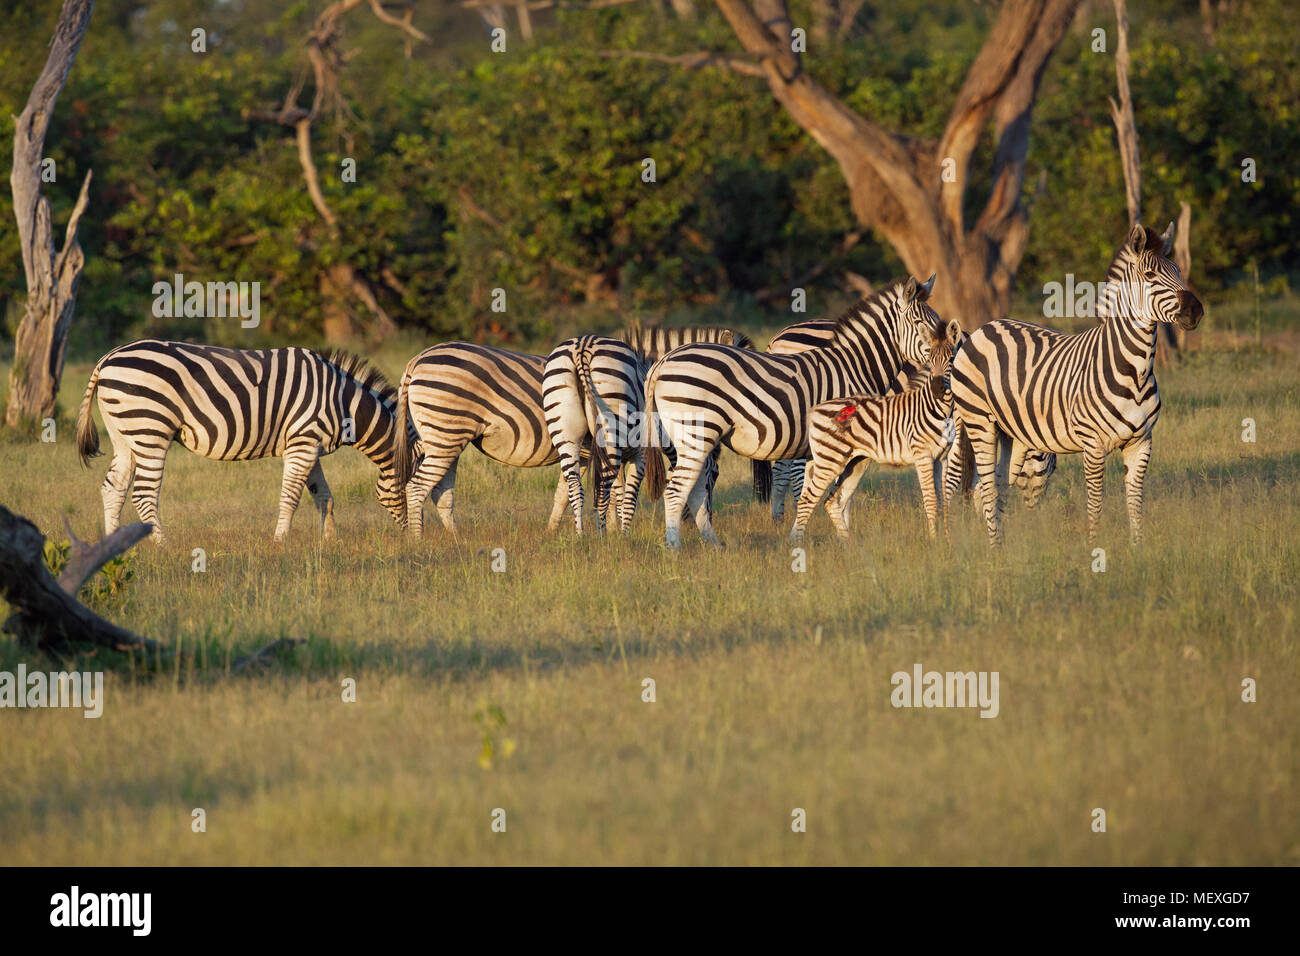 Burchell’s, Common or Plains Zebra (Equus quagga burchellii). A group within a larger herd. Stallion, male, extreme right, head up, protecting six mar Stock Photo